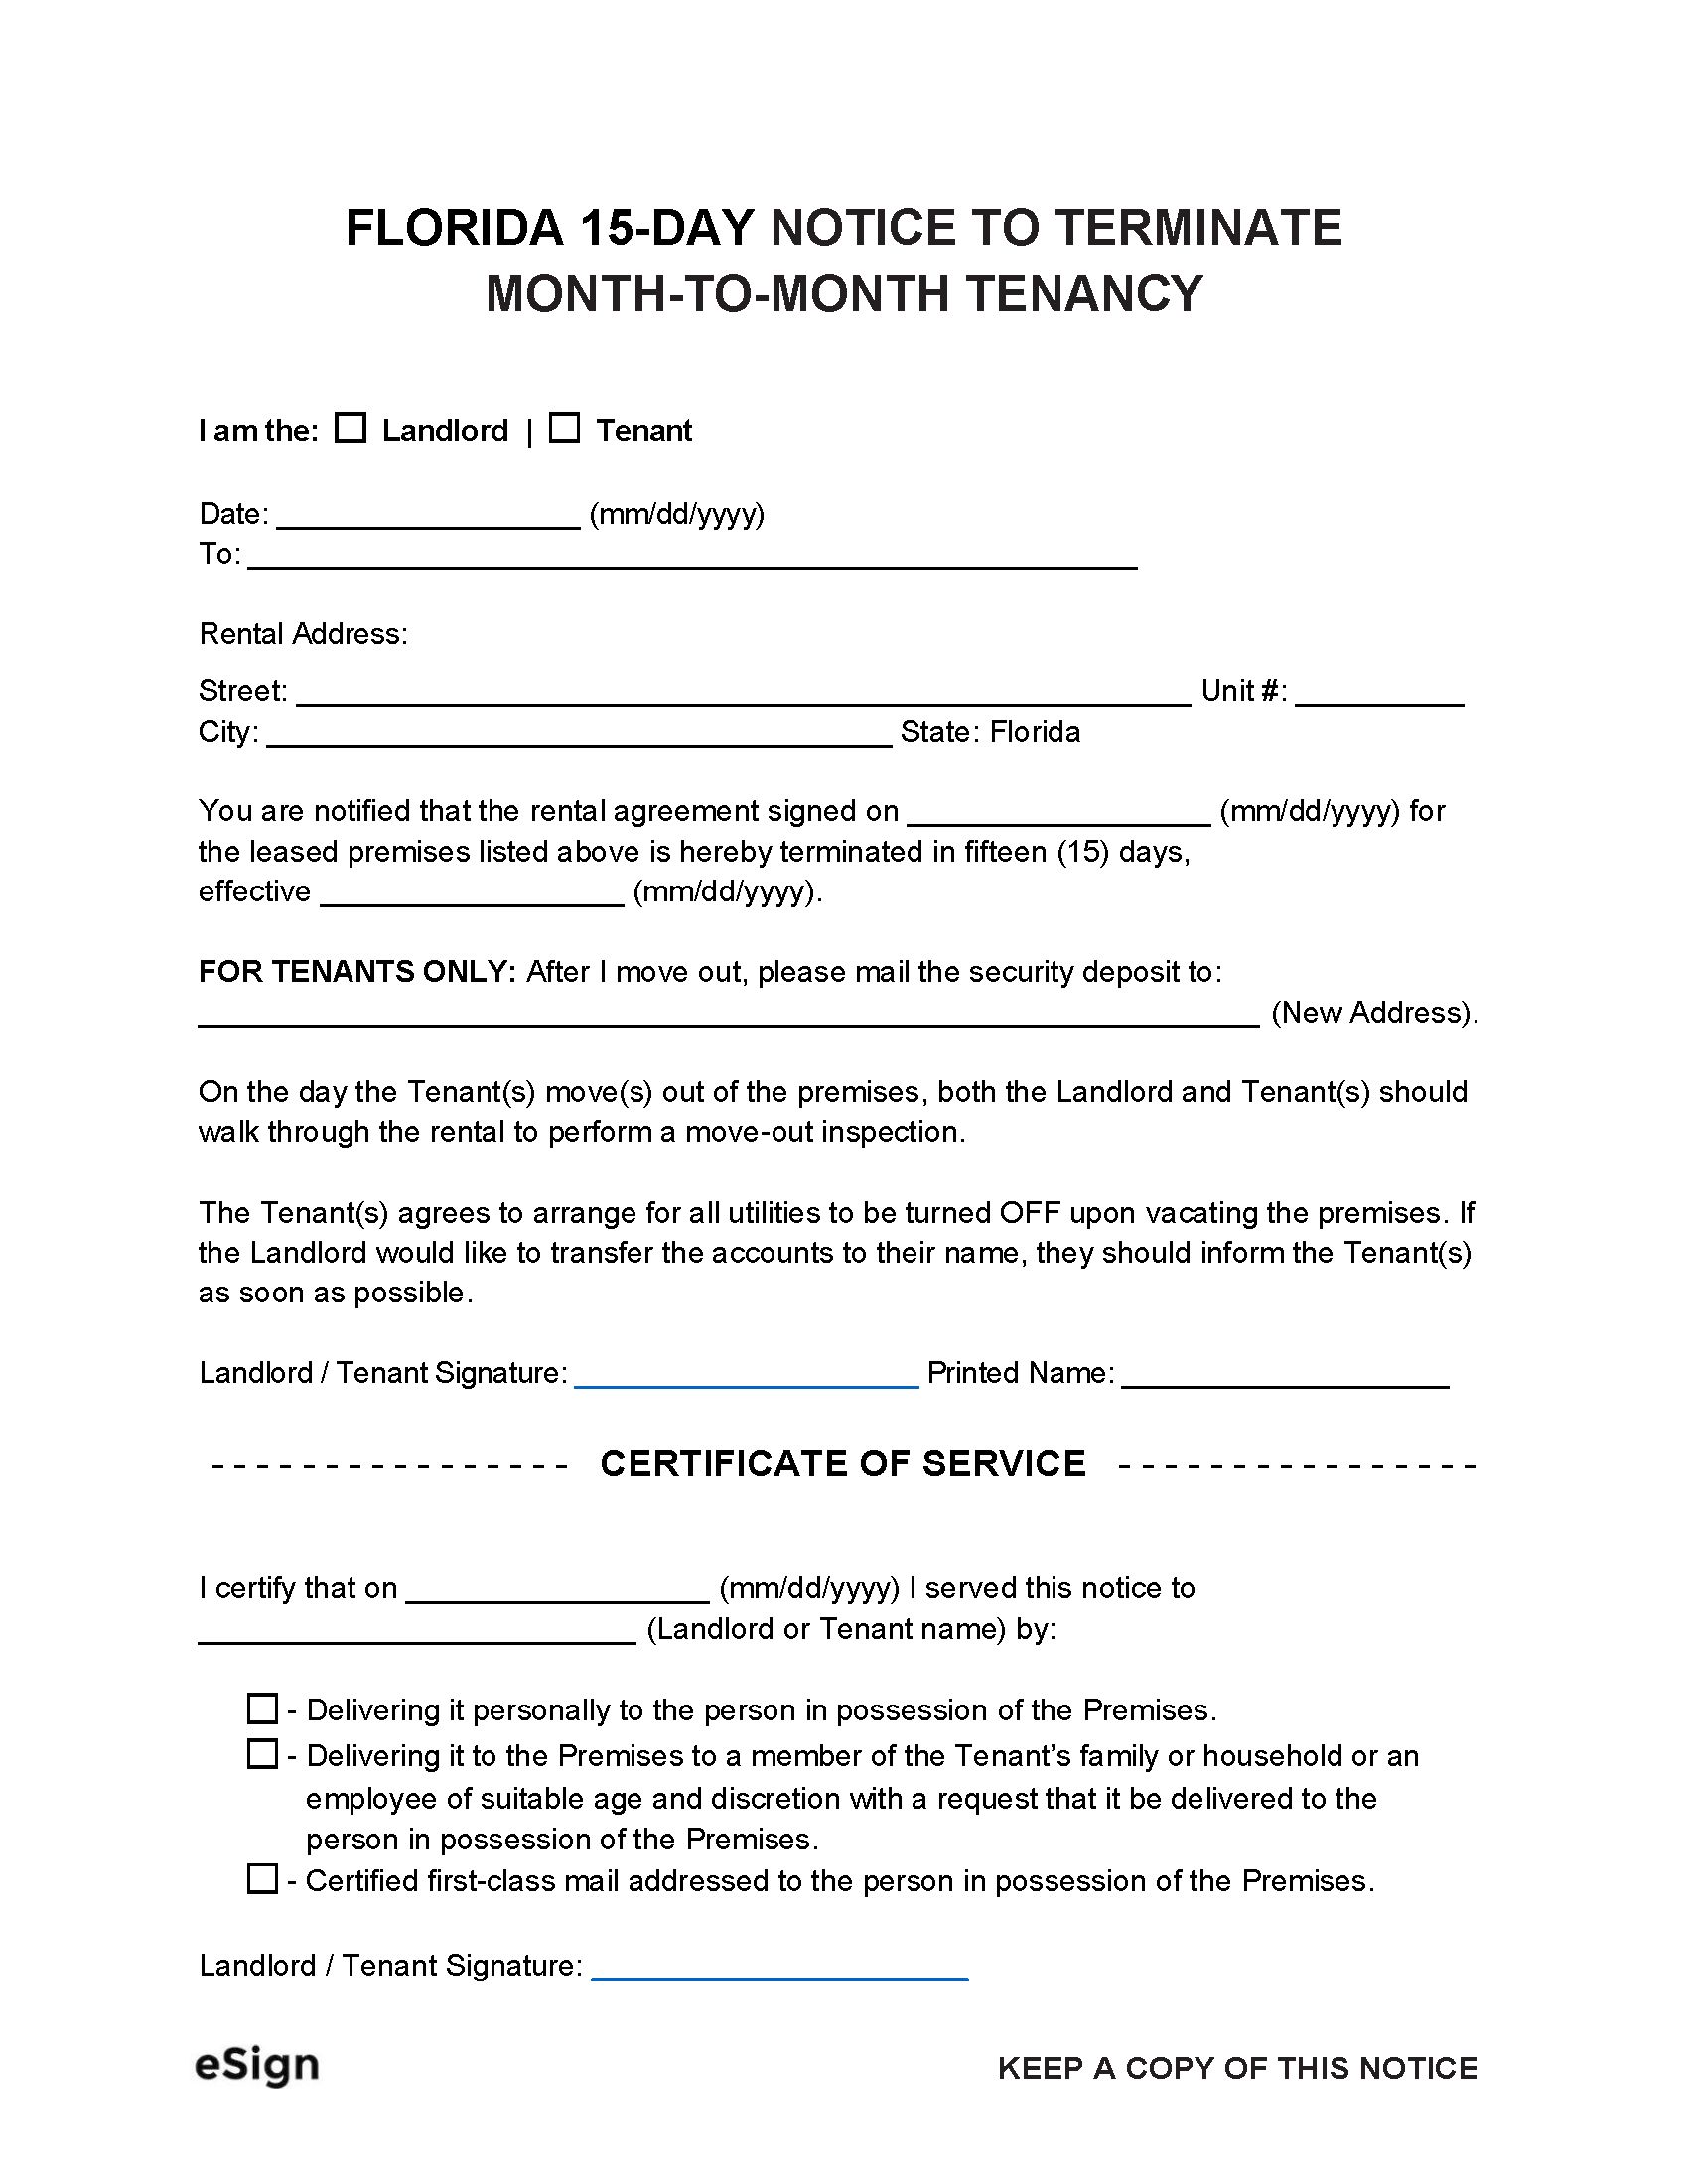 notice to vacate property from landlord to tenant